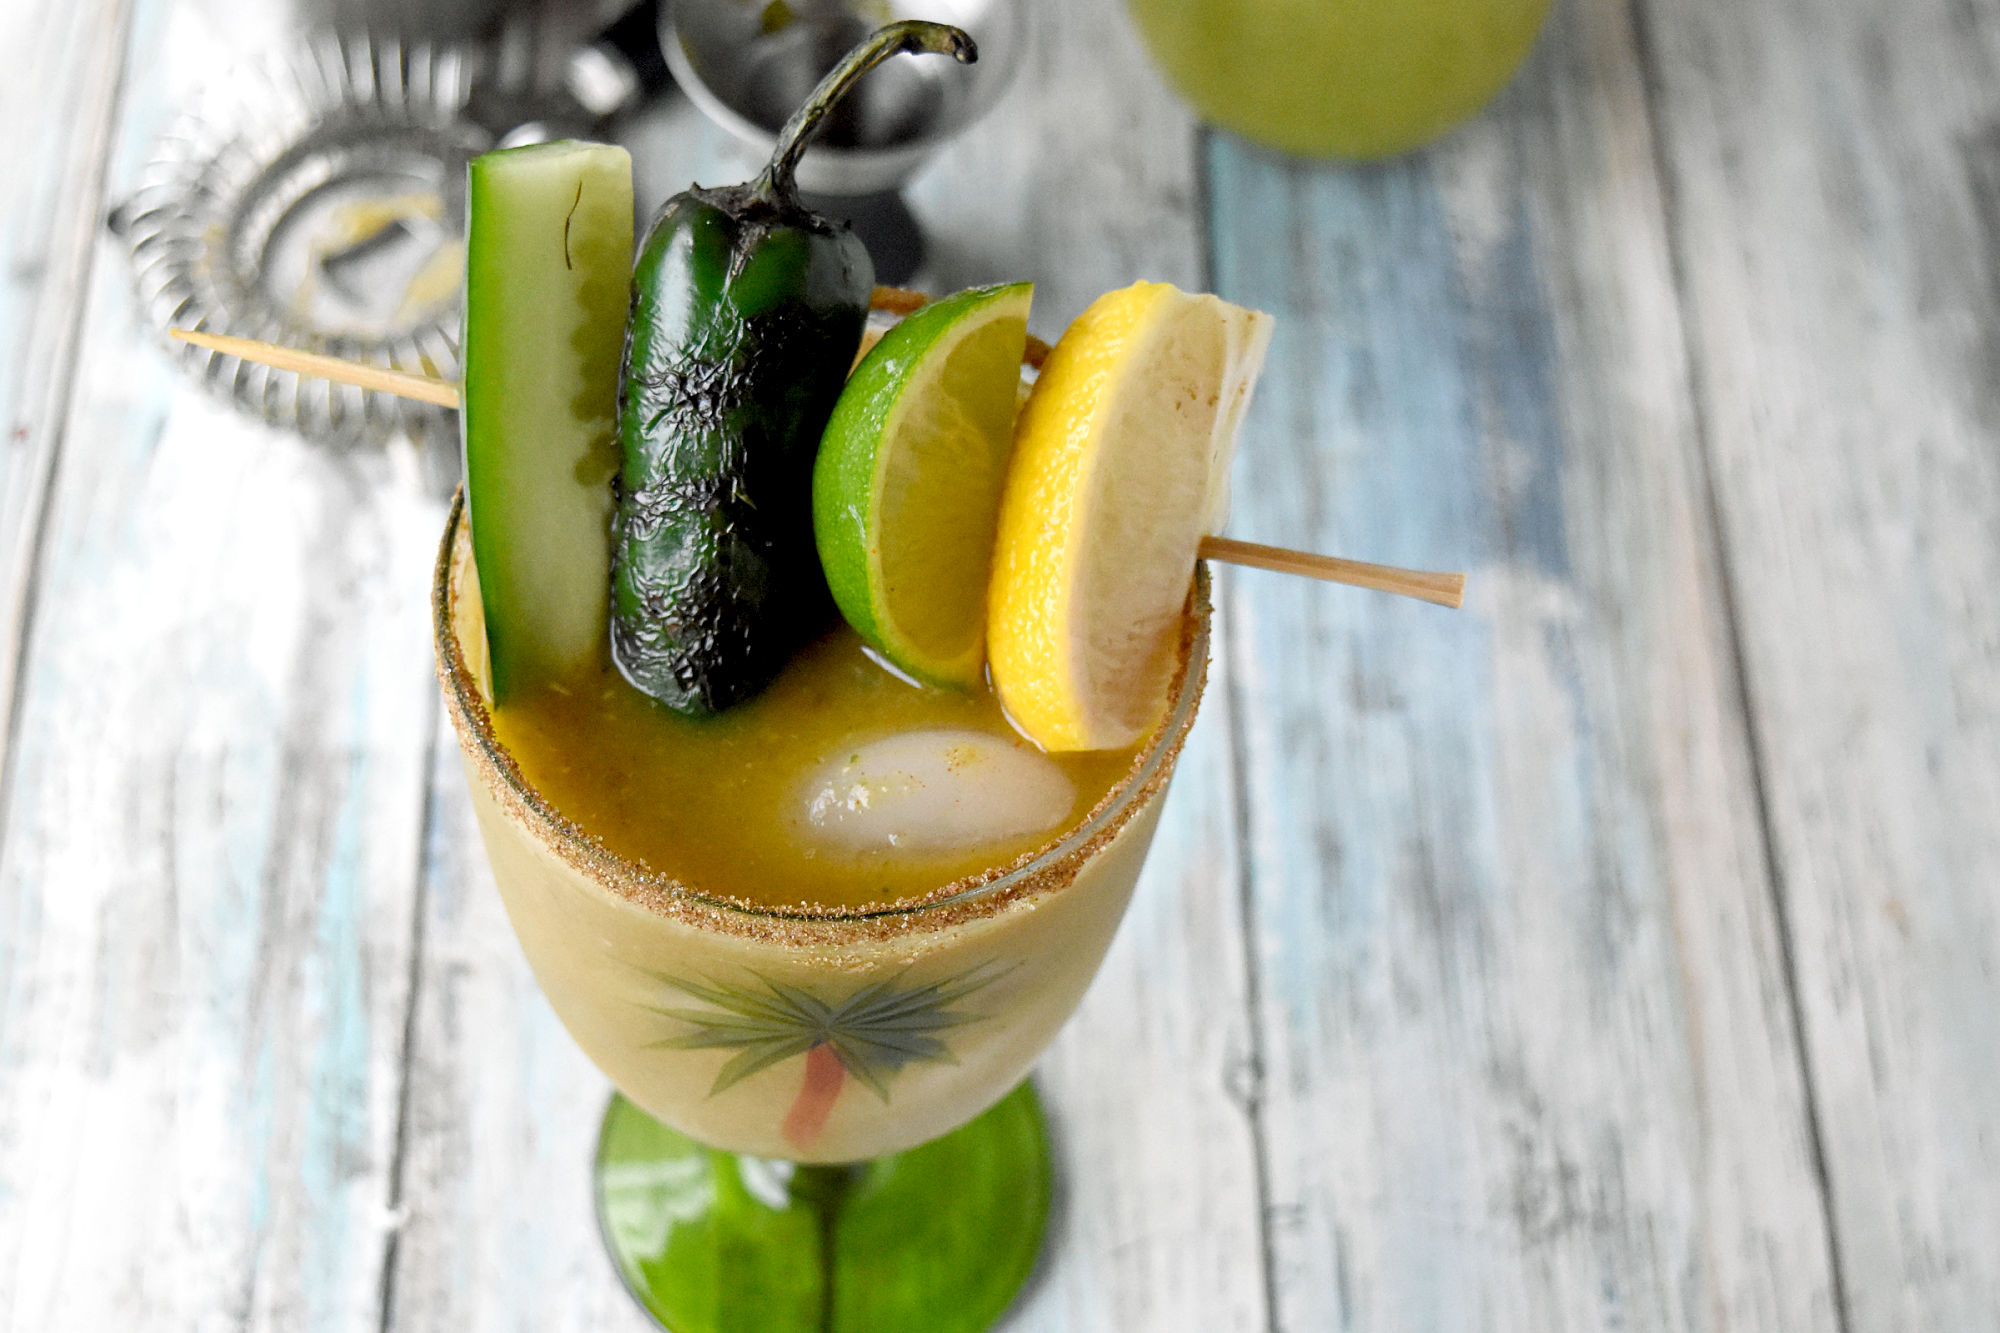 A Verde Mary is a delicious twist on a Bloody Mary! The base is made with tomatillos, jalapenos, green chiles, celery just to name a few green ingredients. #BrunchWeek #bloodyMary #VerdeMary #cocktail
